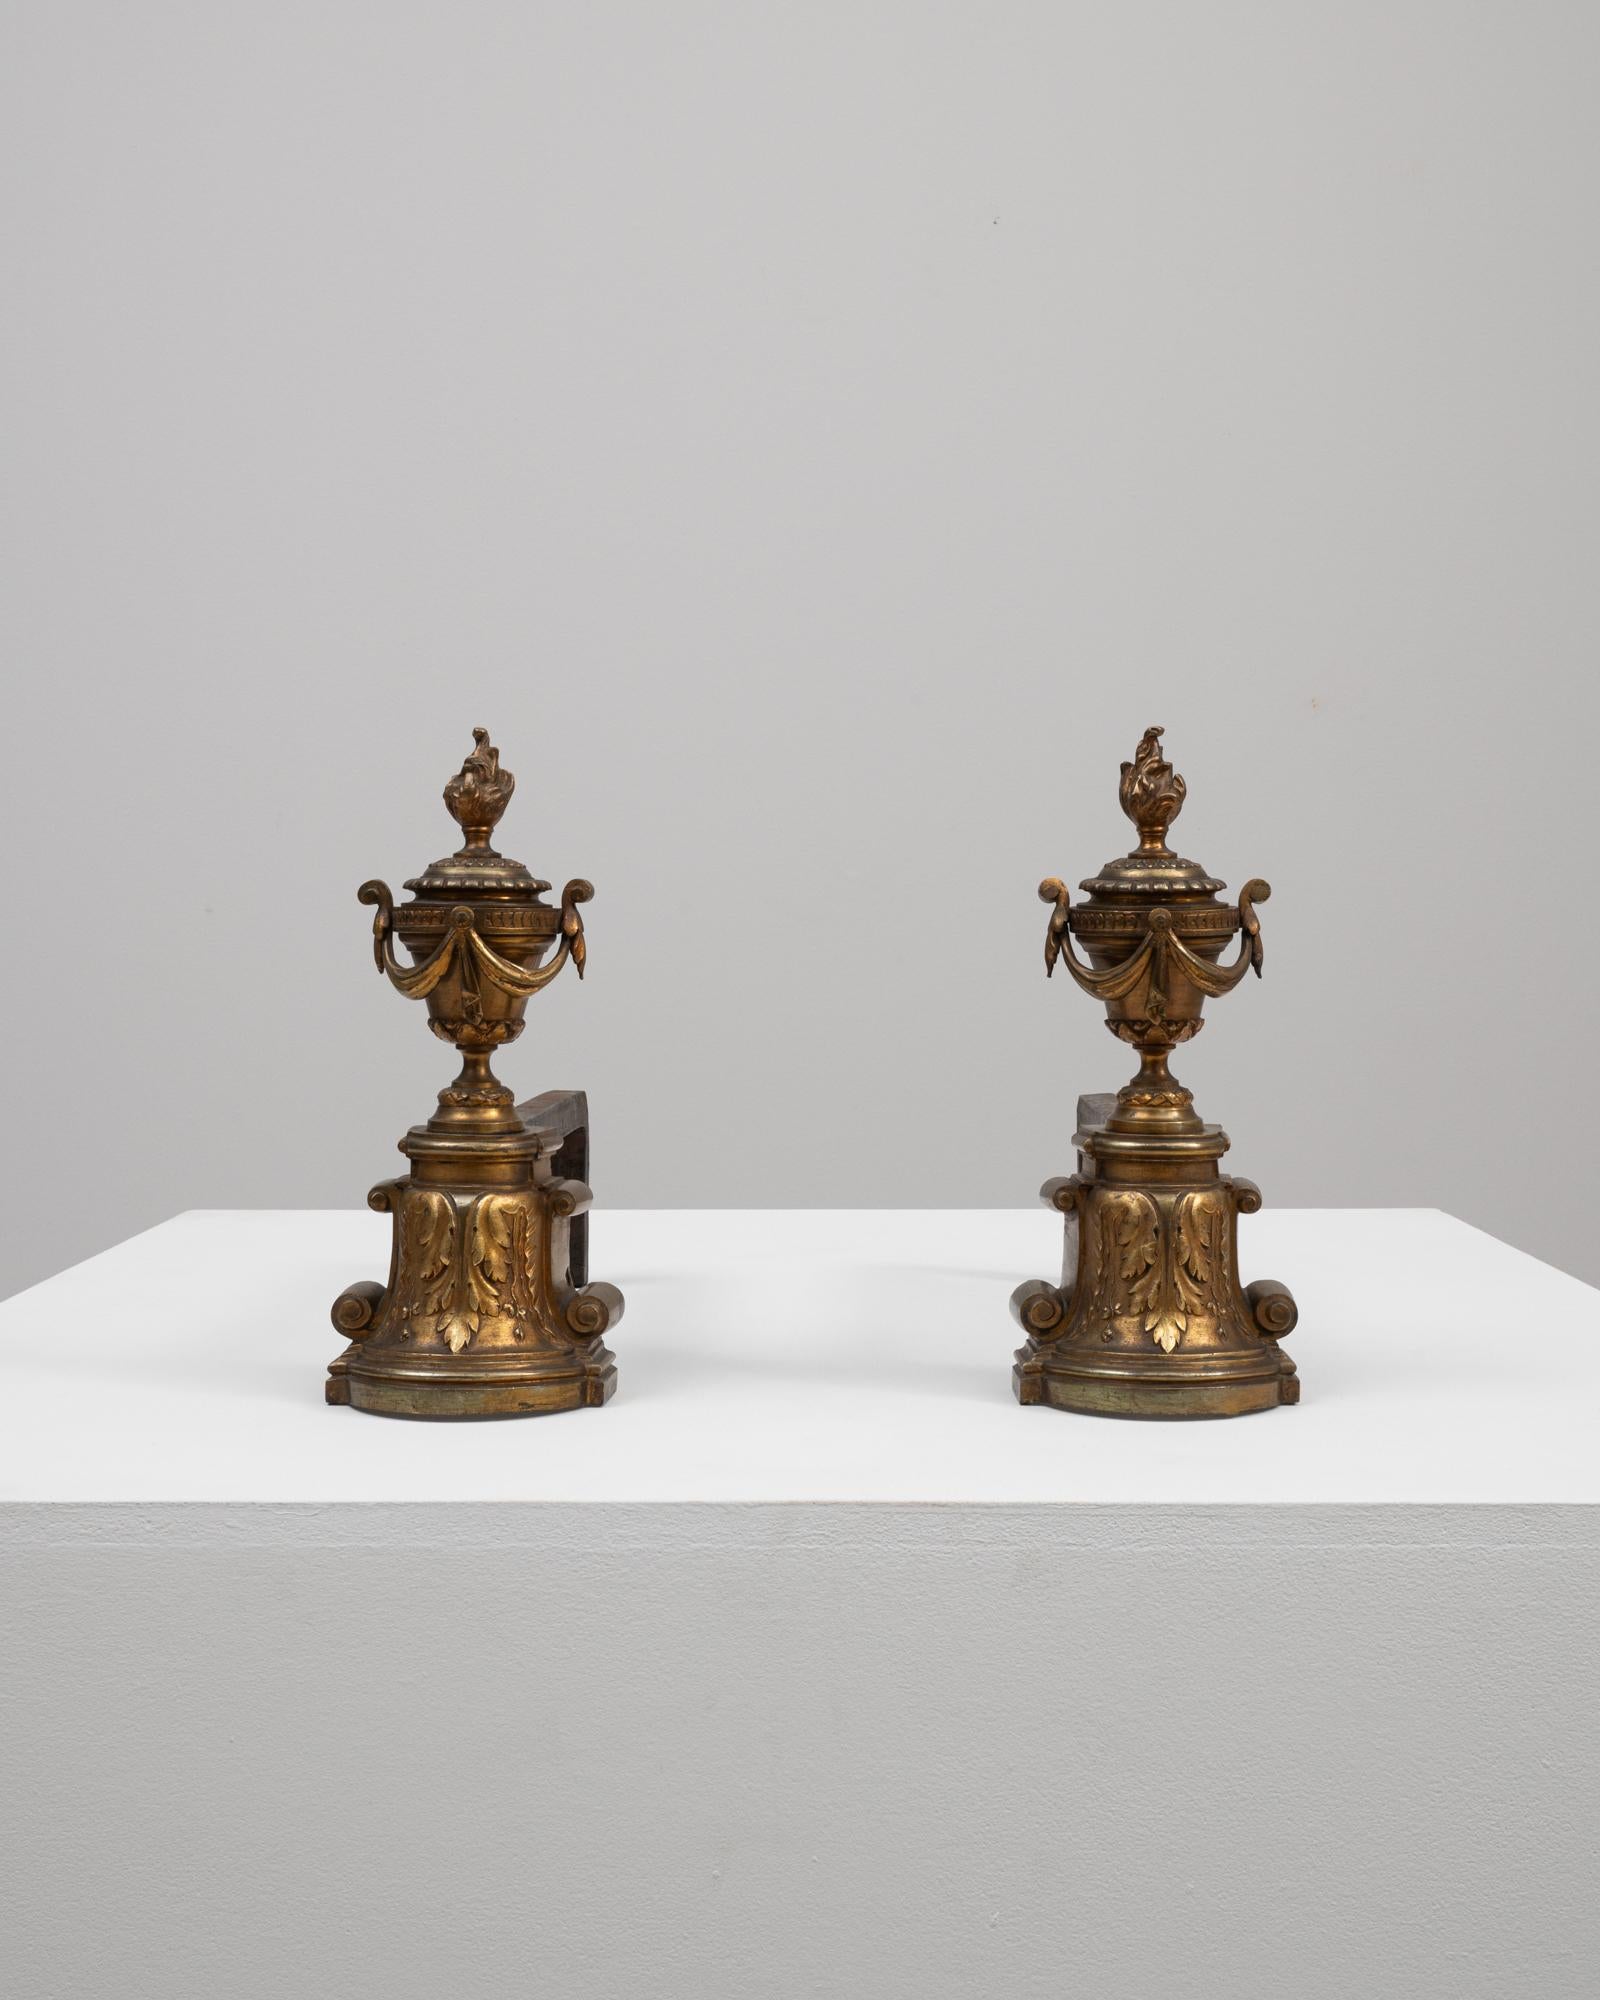 These 19th Century French Cast Iron Fire Dogs boast an ornamental design, rich with the opulent details characteristic of the period. Also known as andirons, these pieces served a functional purpose to support the firewood but also stood as symbols